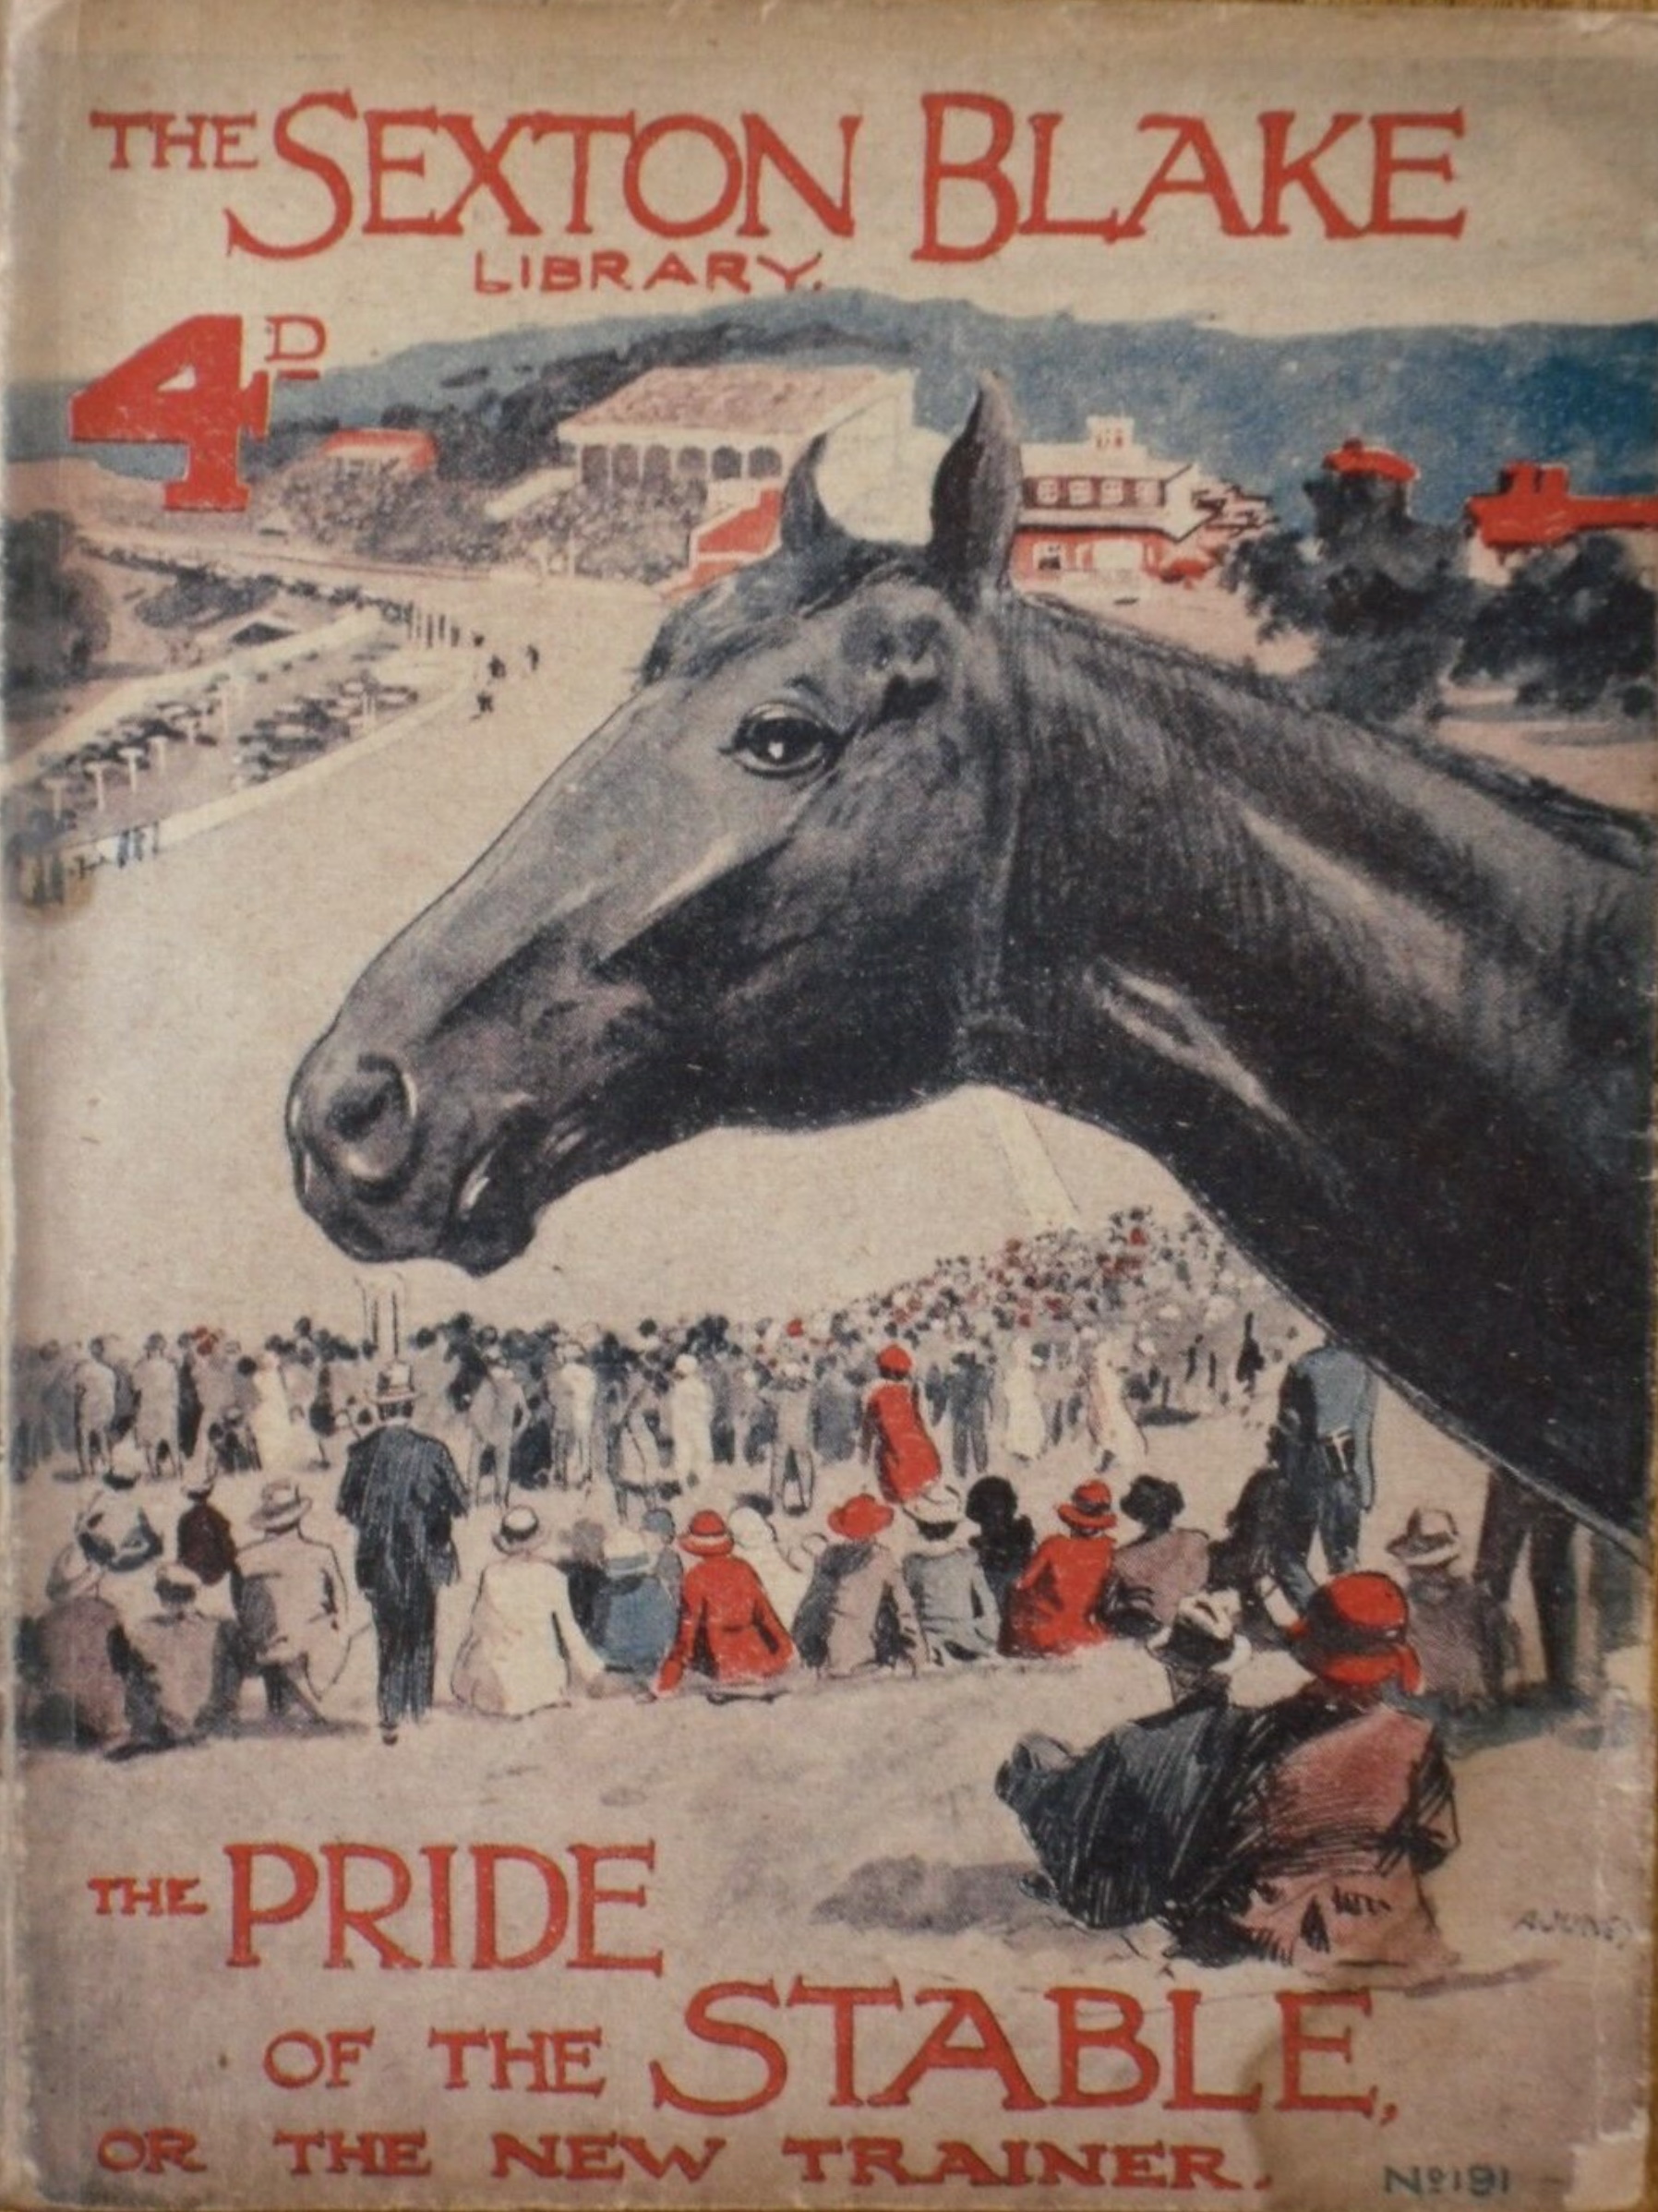 THE PRIDE OF THE STABLE